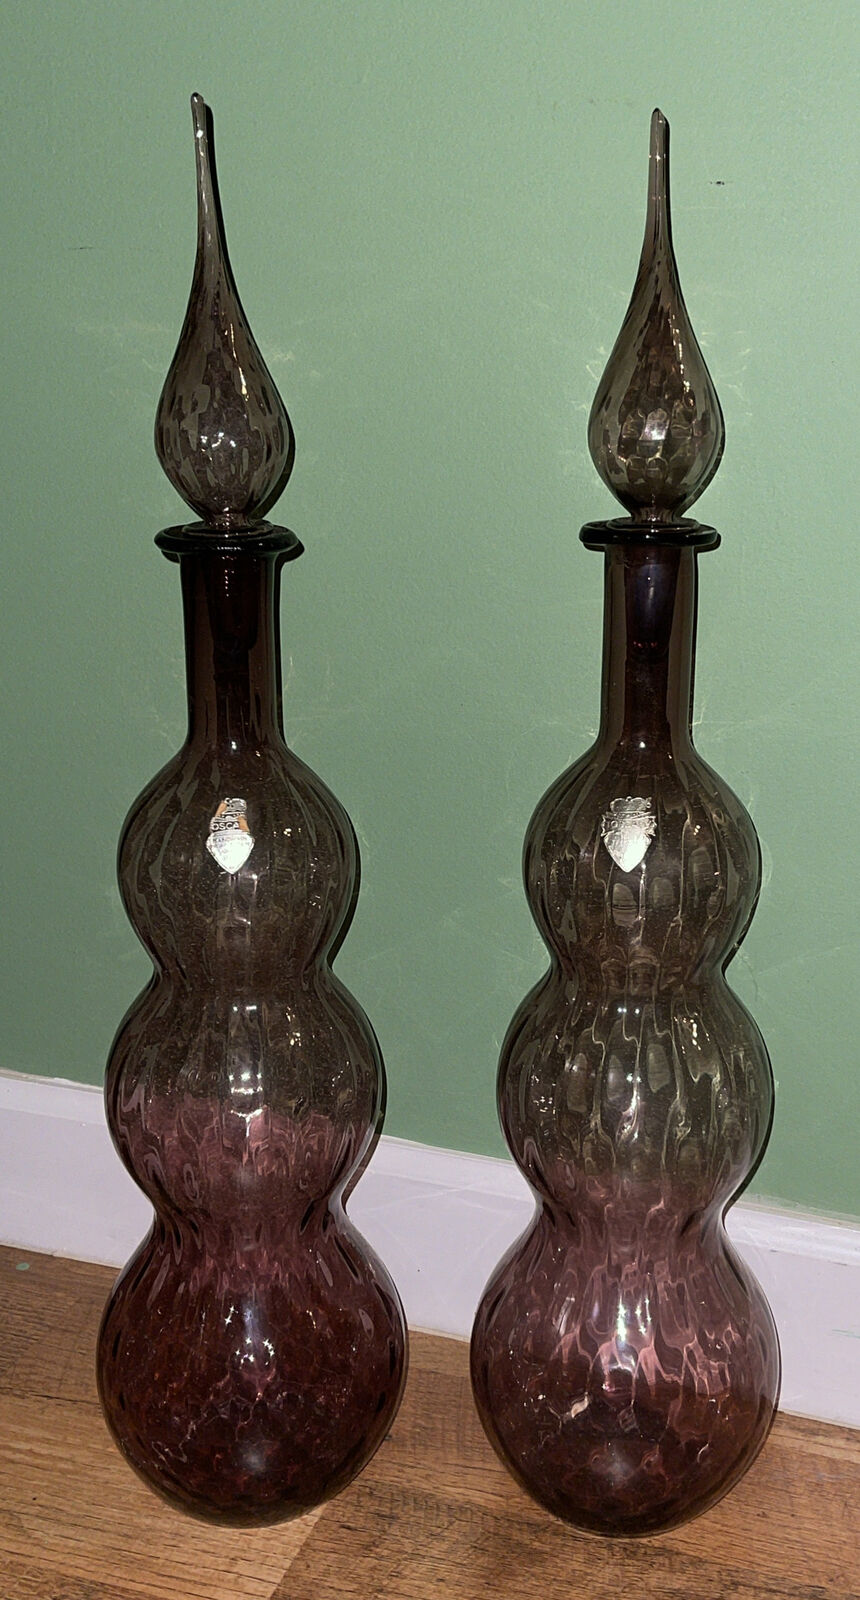 VTG Toscany Amethyst  Glass Genie Bottle Decanters w/Stoppers Set Of 2 Rare Find